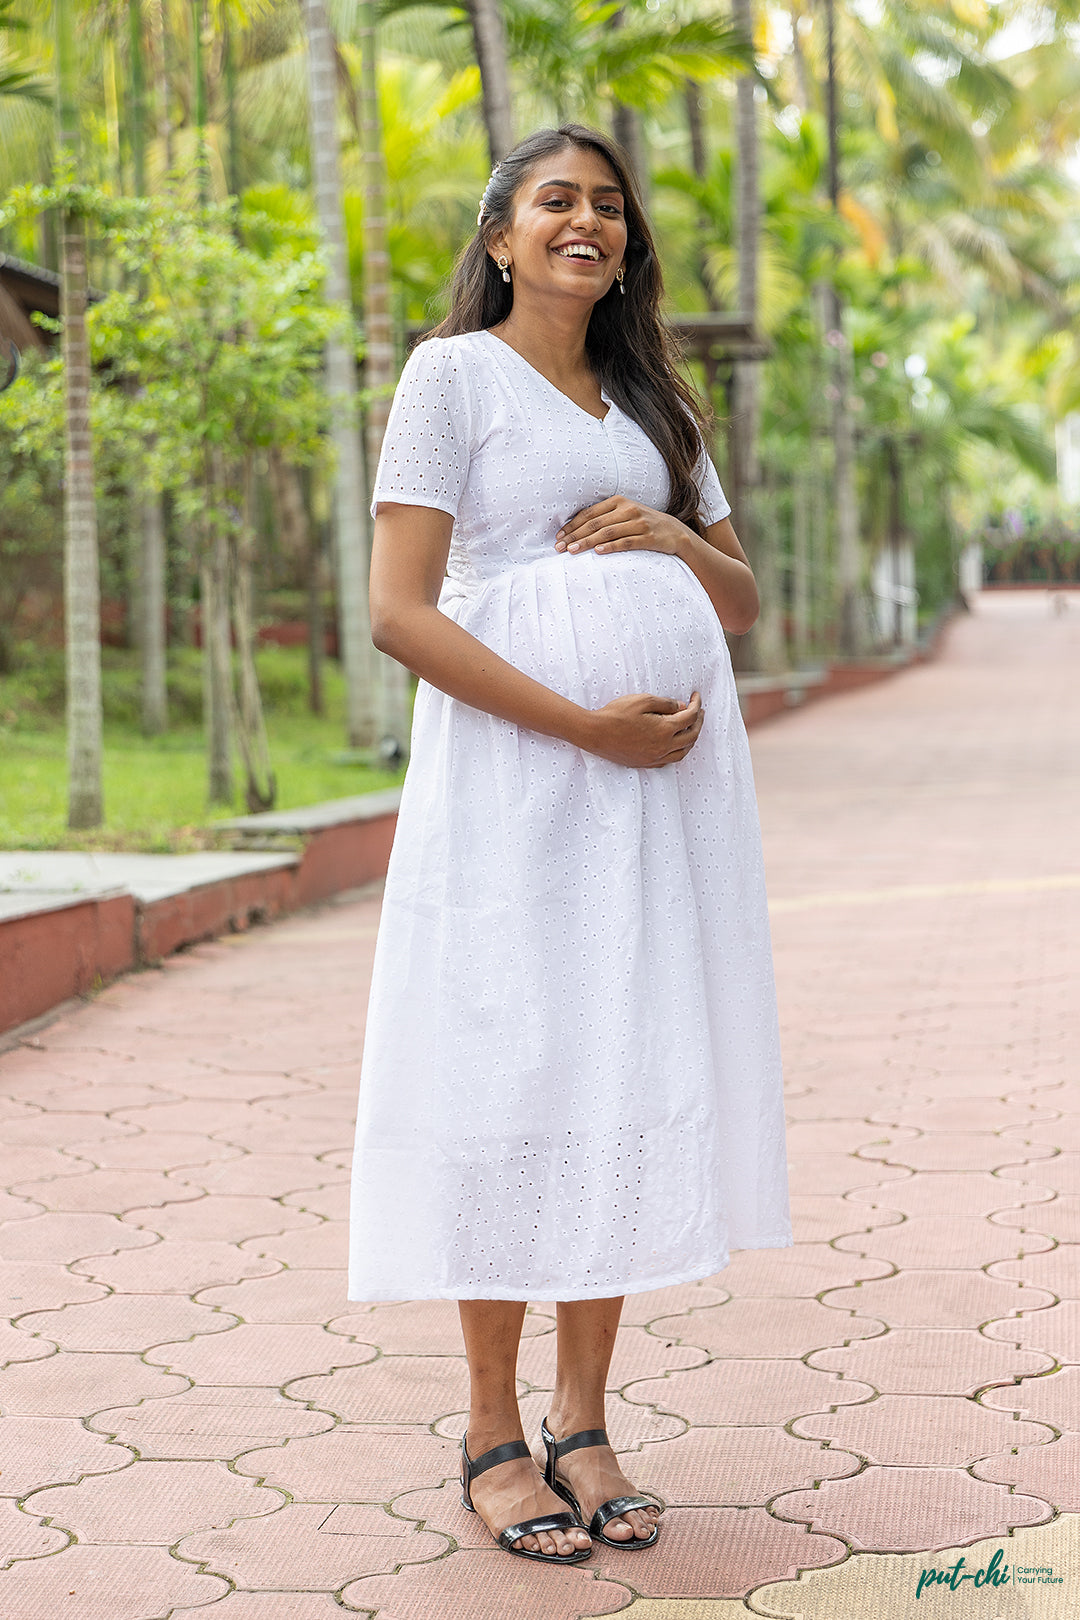 Radiate Elegance During Your Pregnancy